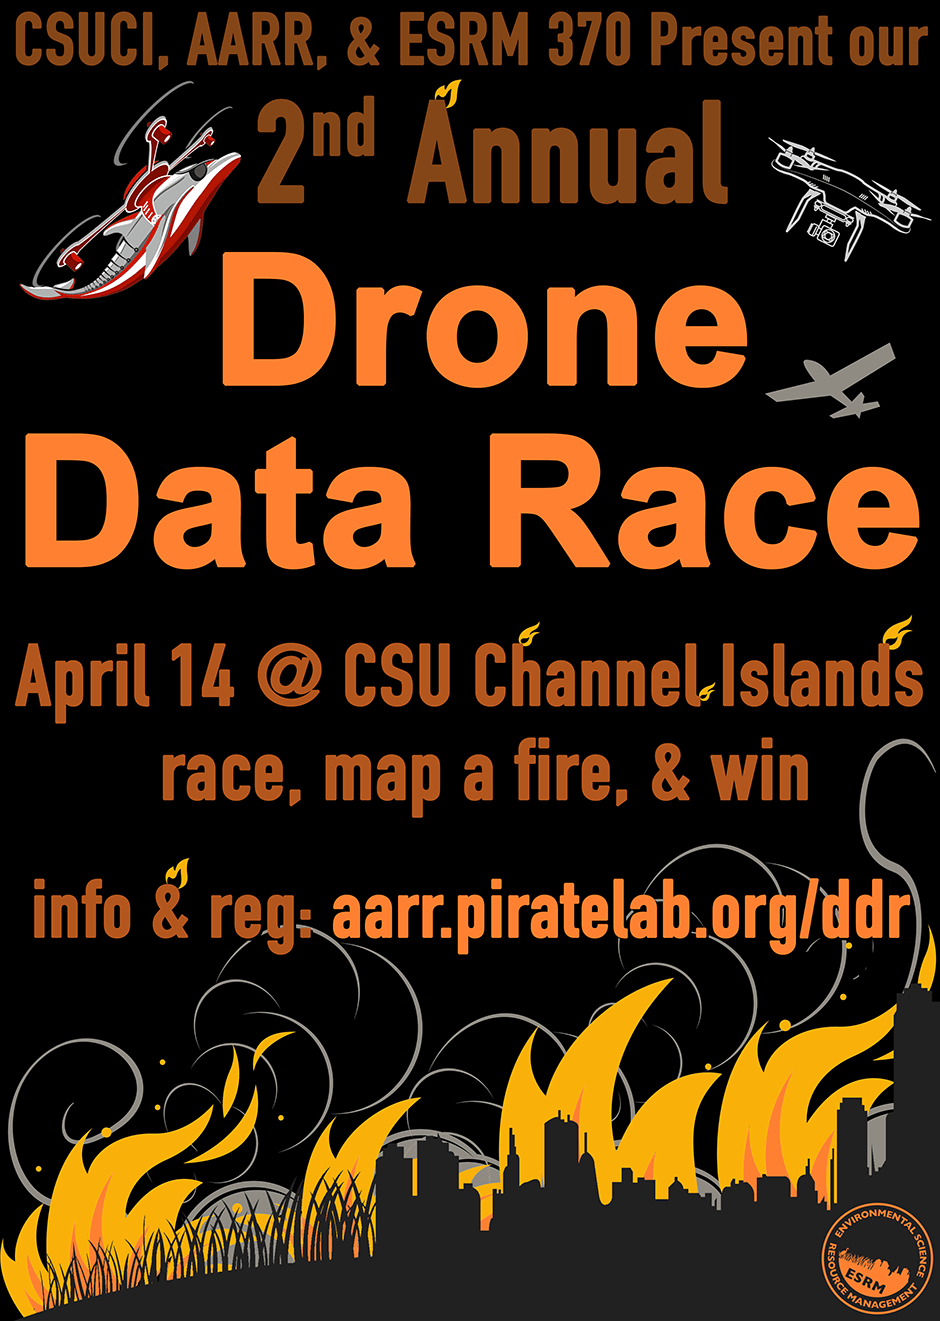 Second, annual drone data race